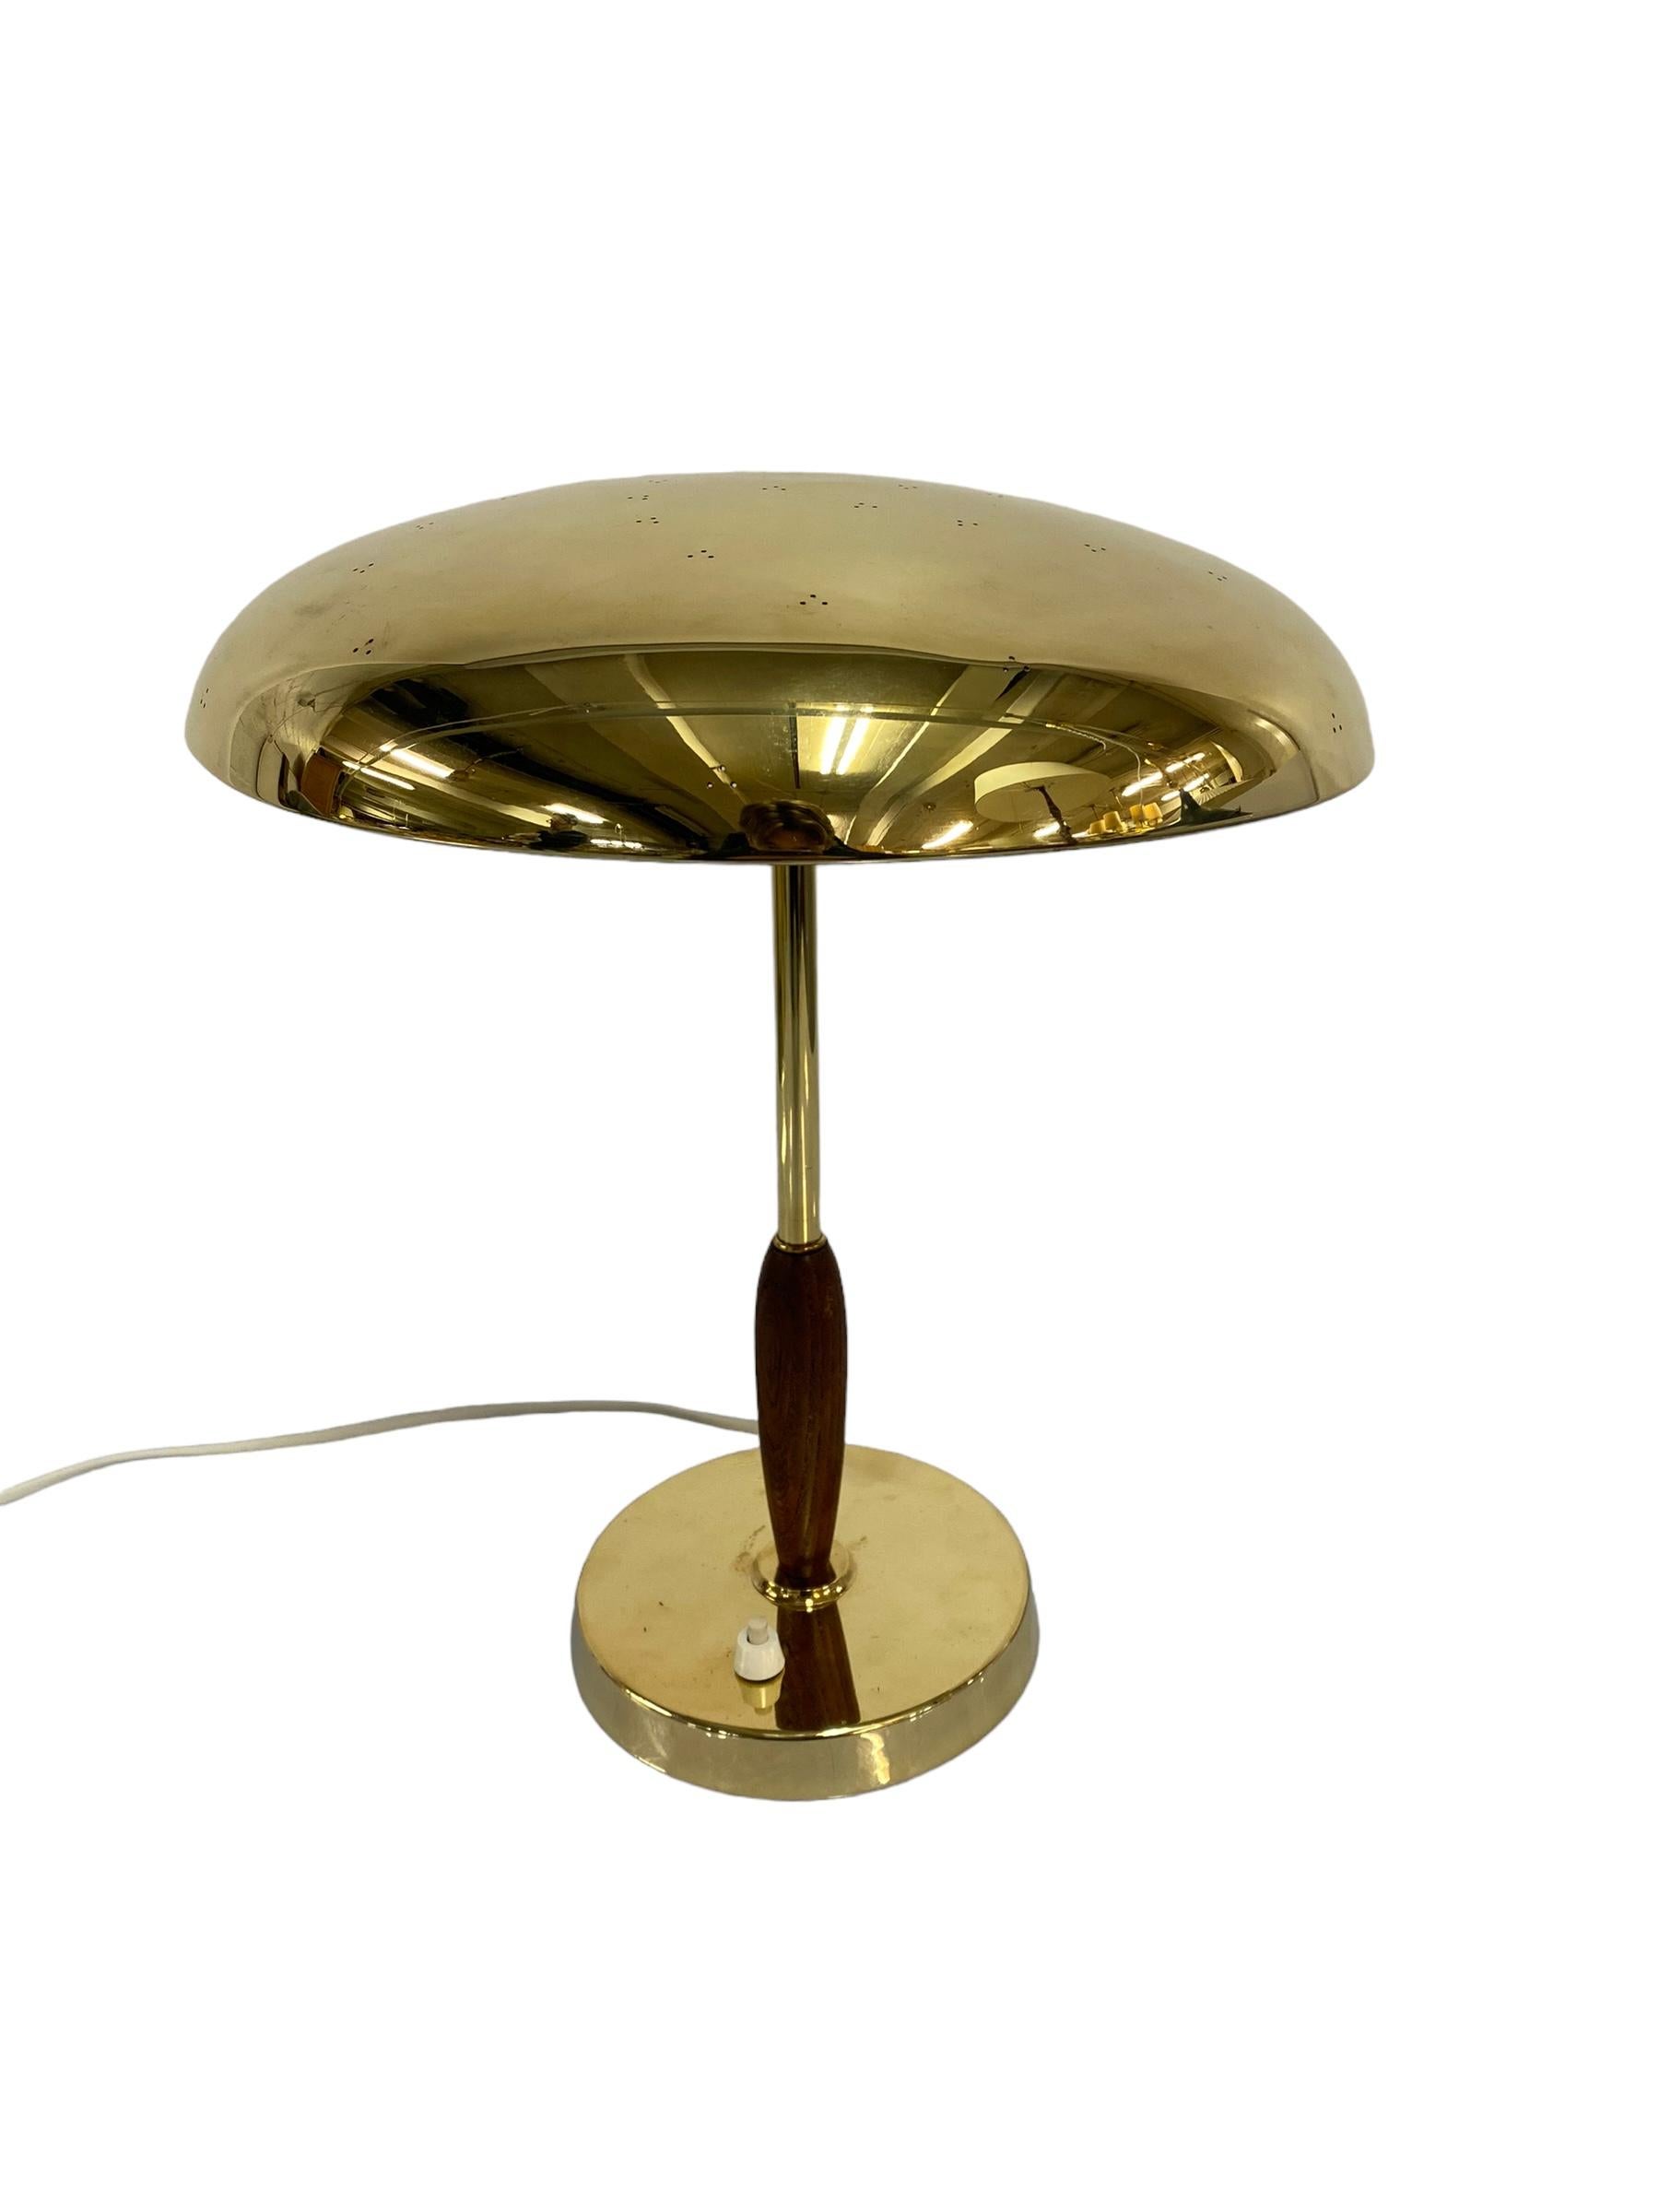 A very beautiful and elegant table lamp model. 407024, manufactured by PSO in Finland in the 1950s. This lamp depicts everything that makes Finnish mid-century lighting so internationally sought after. The design is simple, elegant and functional.